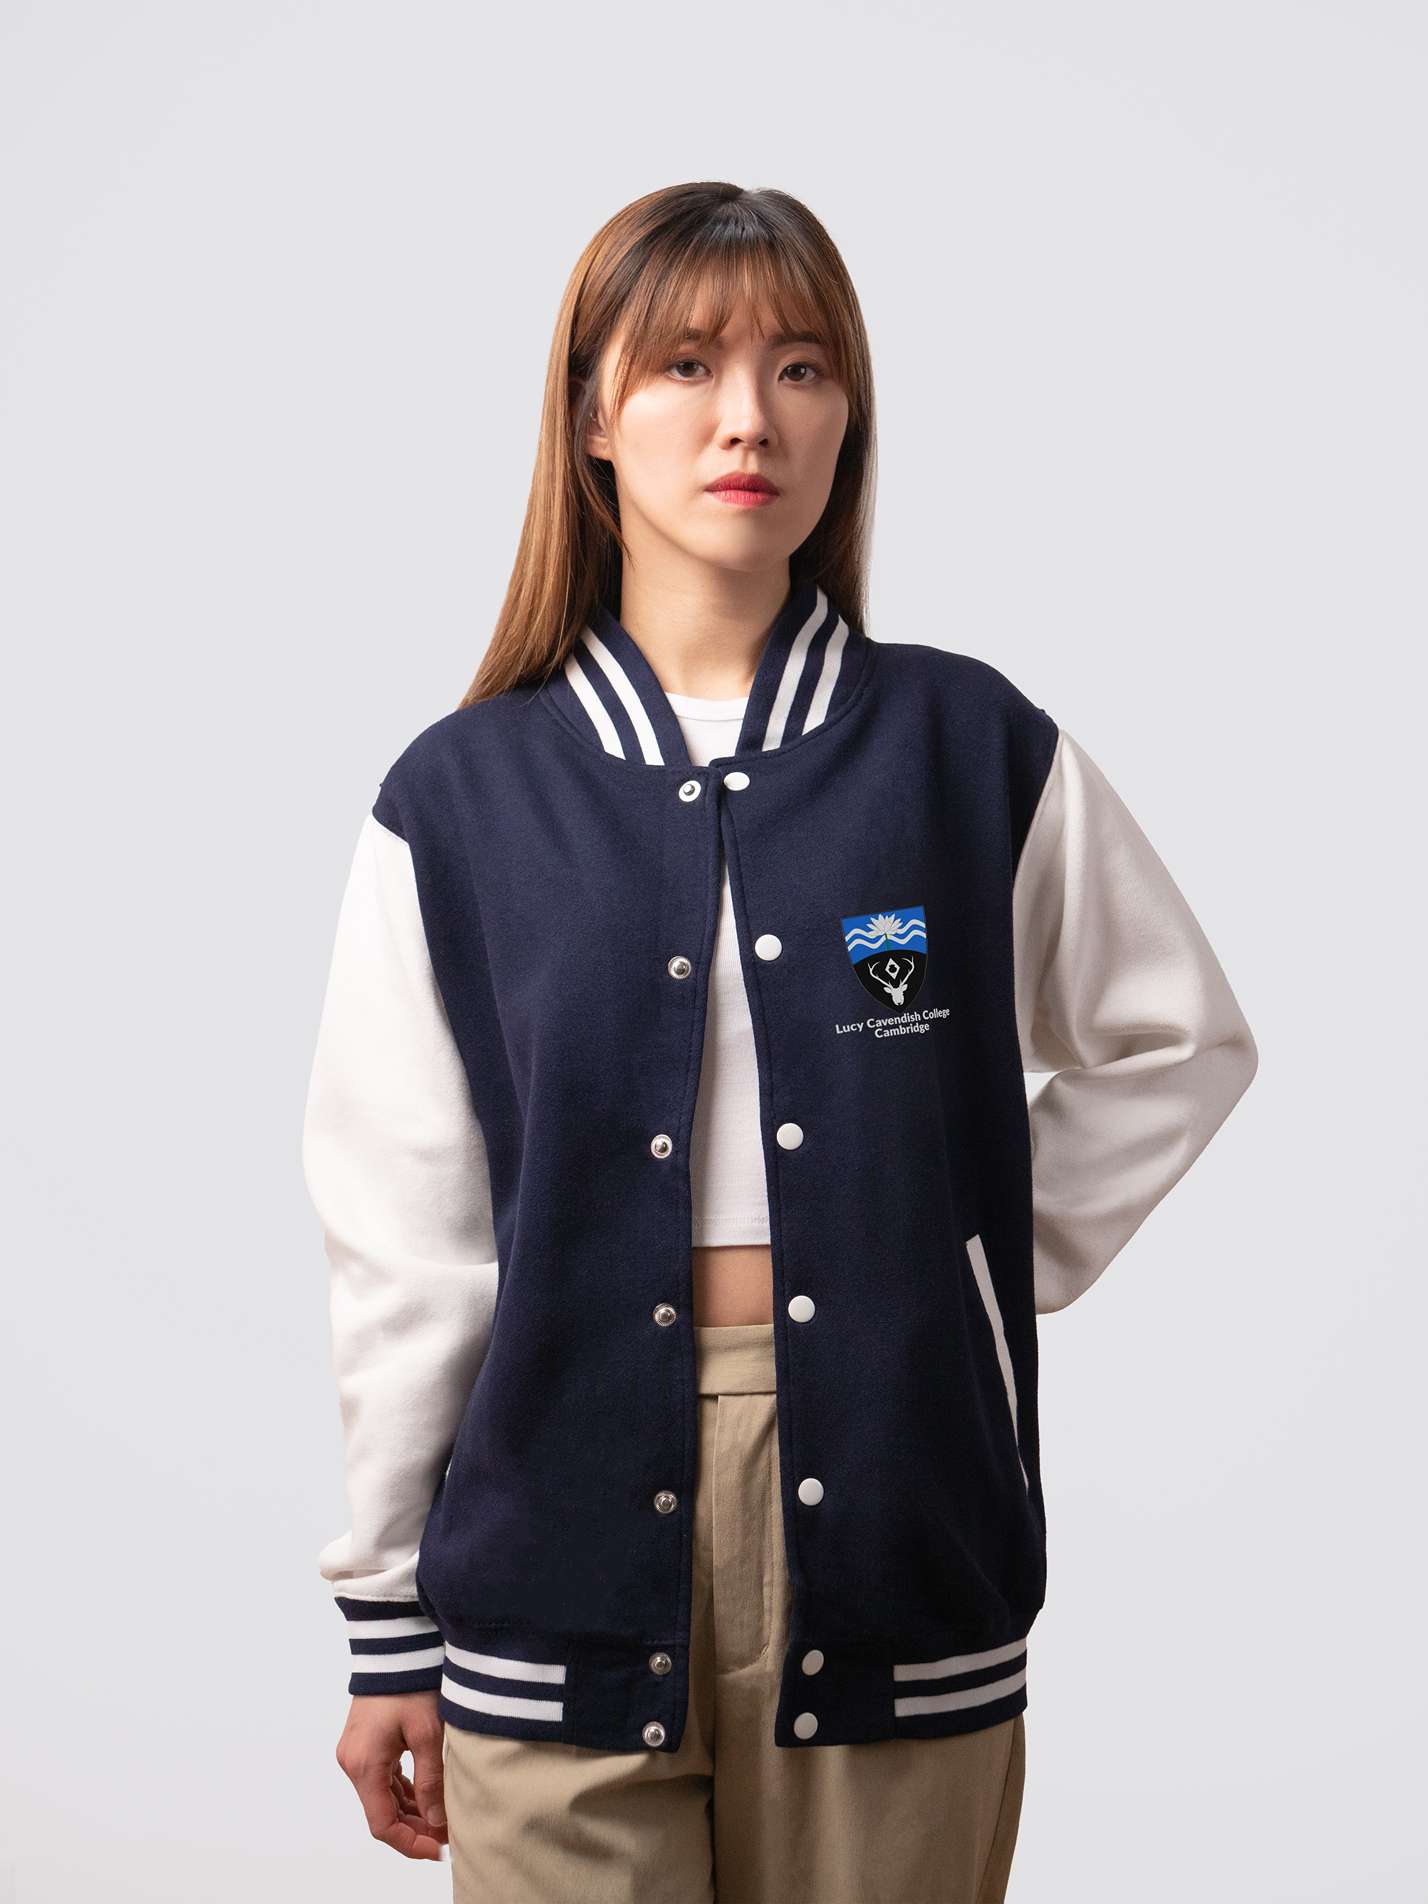 Retro style varsity jacket, with embroidered Lucy Cavendish crest